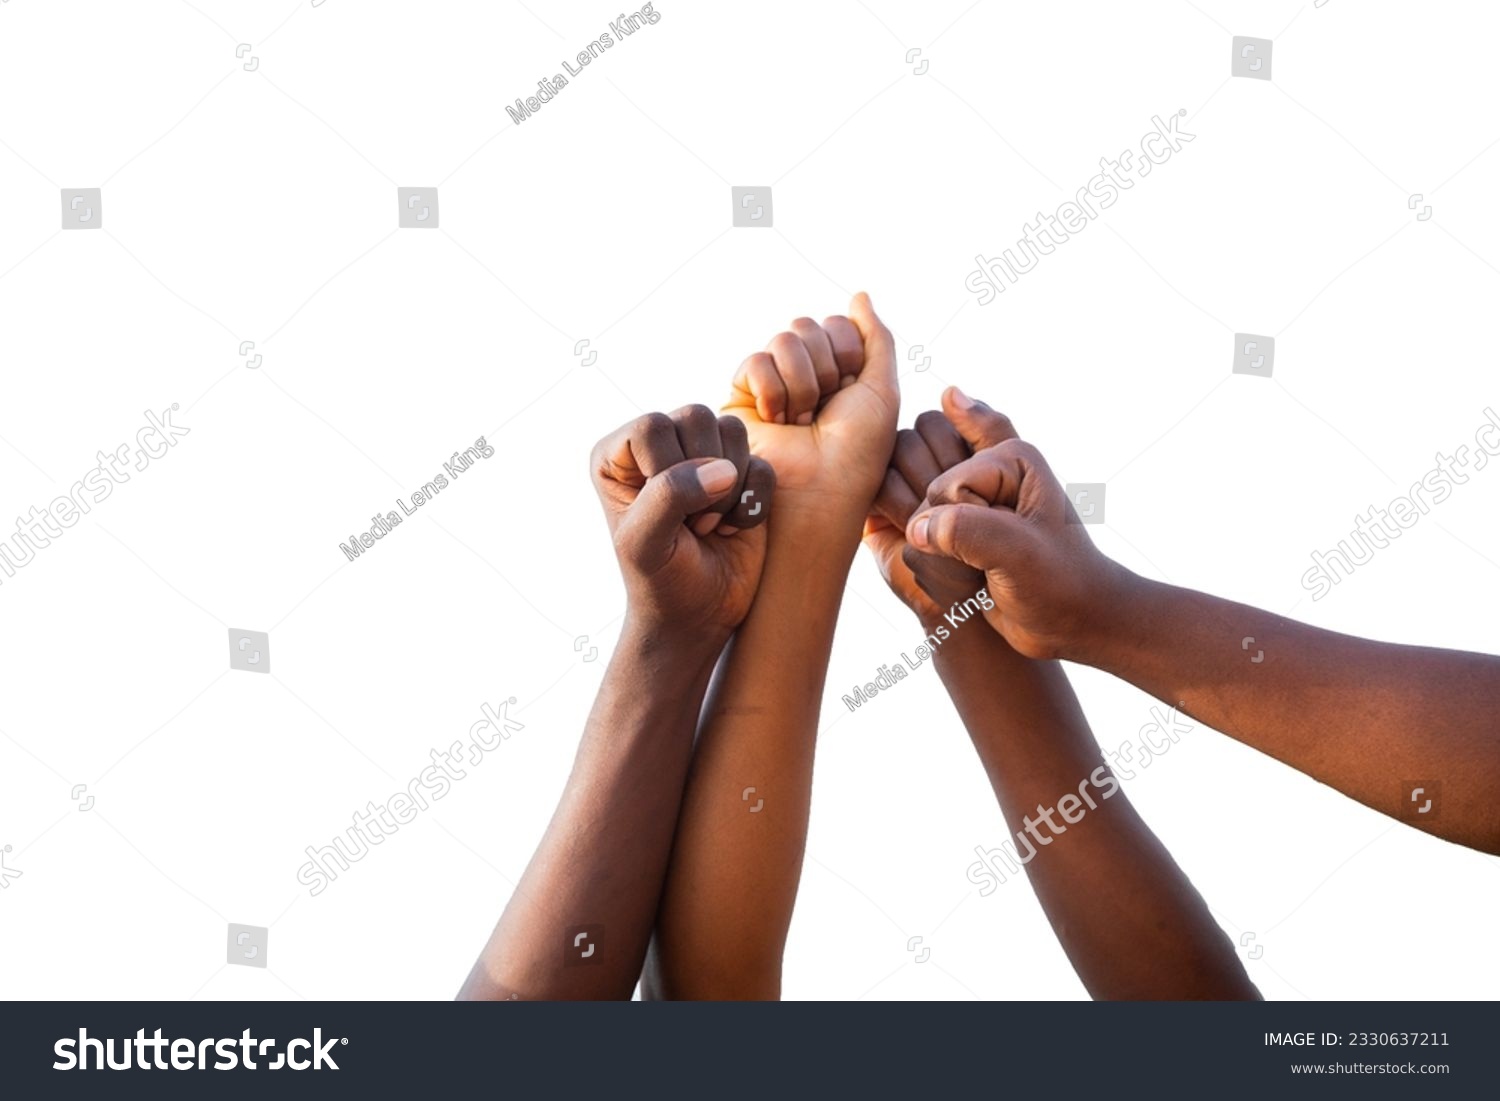 Four fists of African people united in sky, photo with white background and copy space. #2330637211